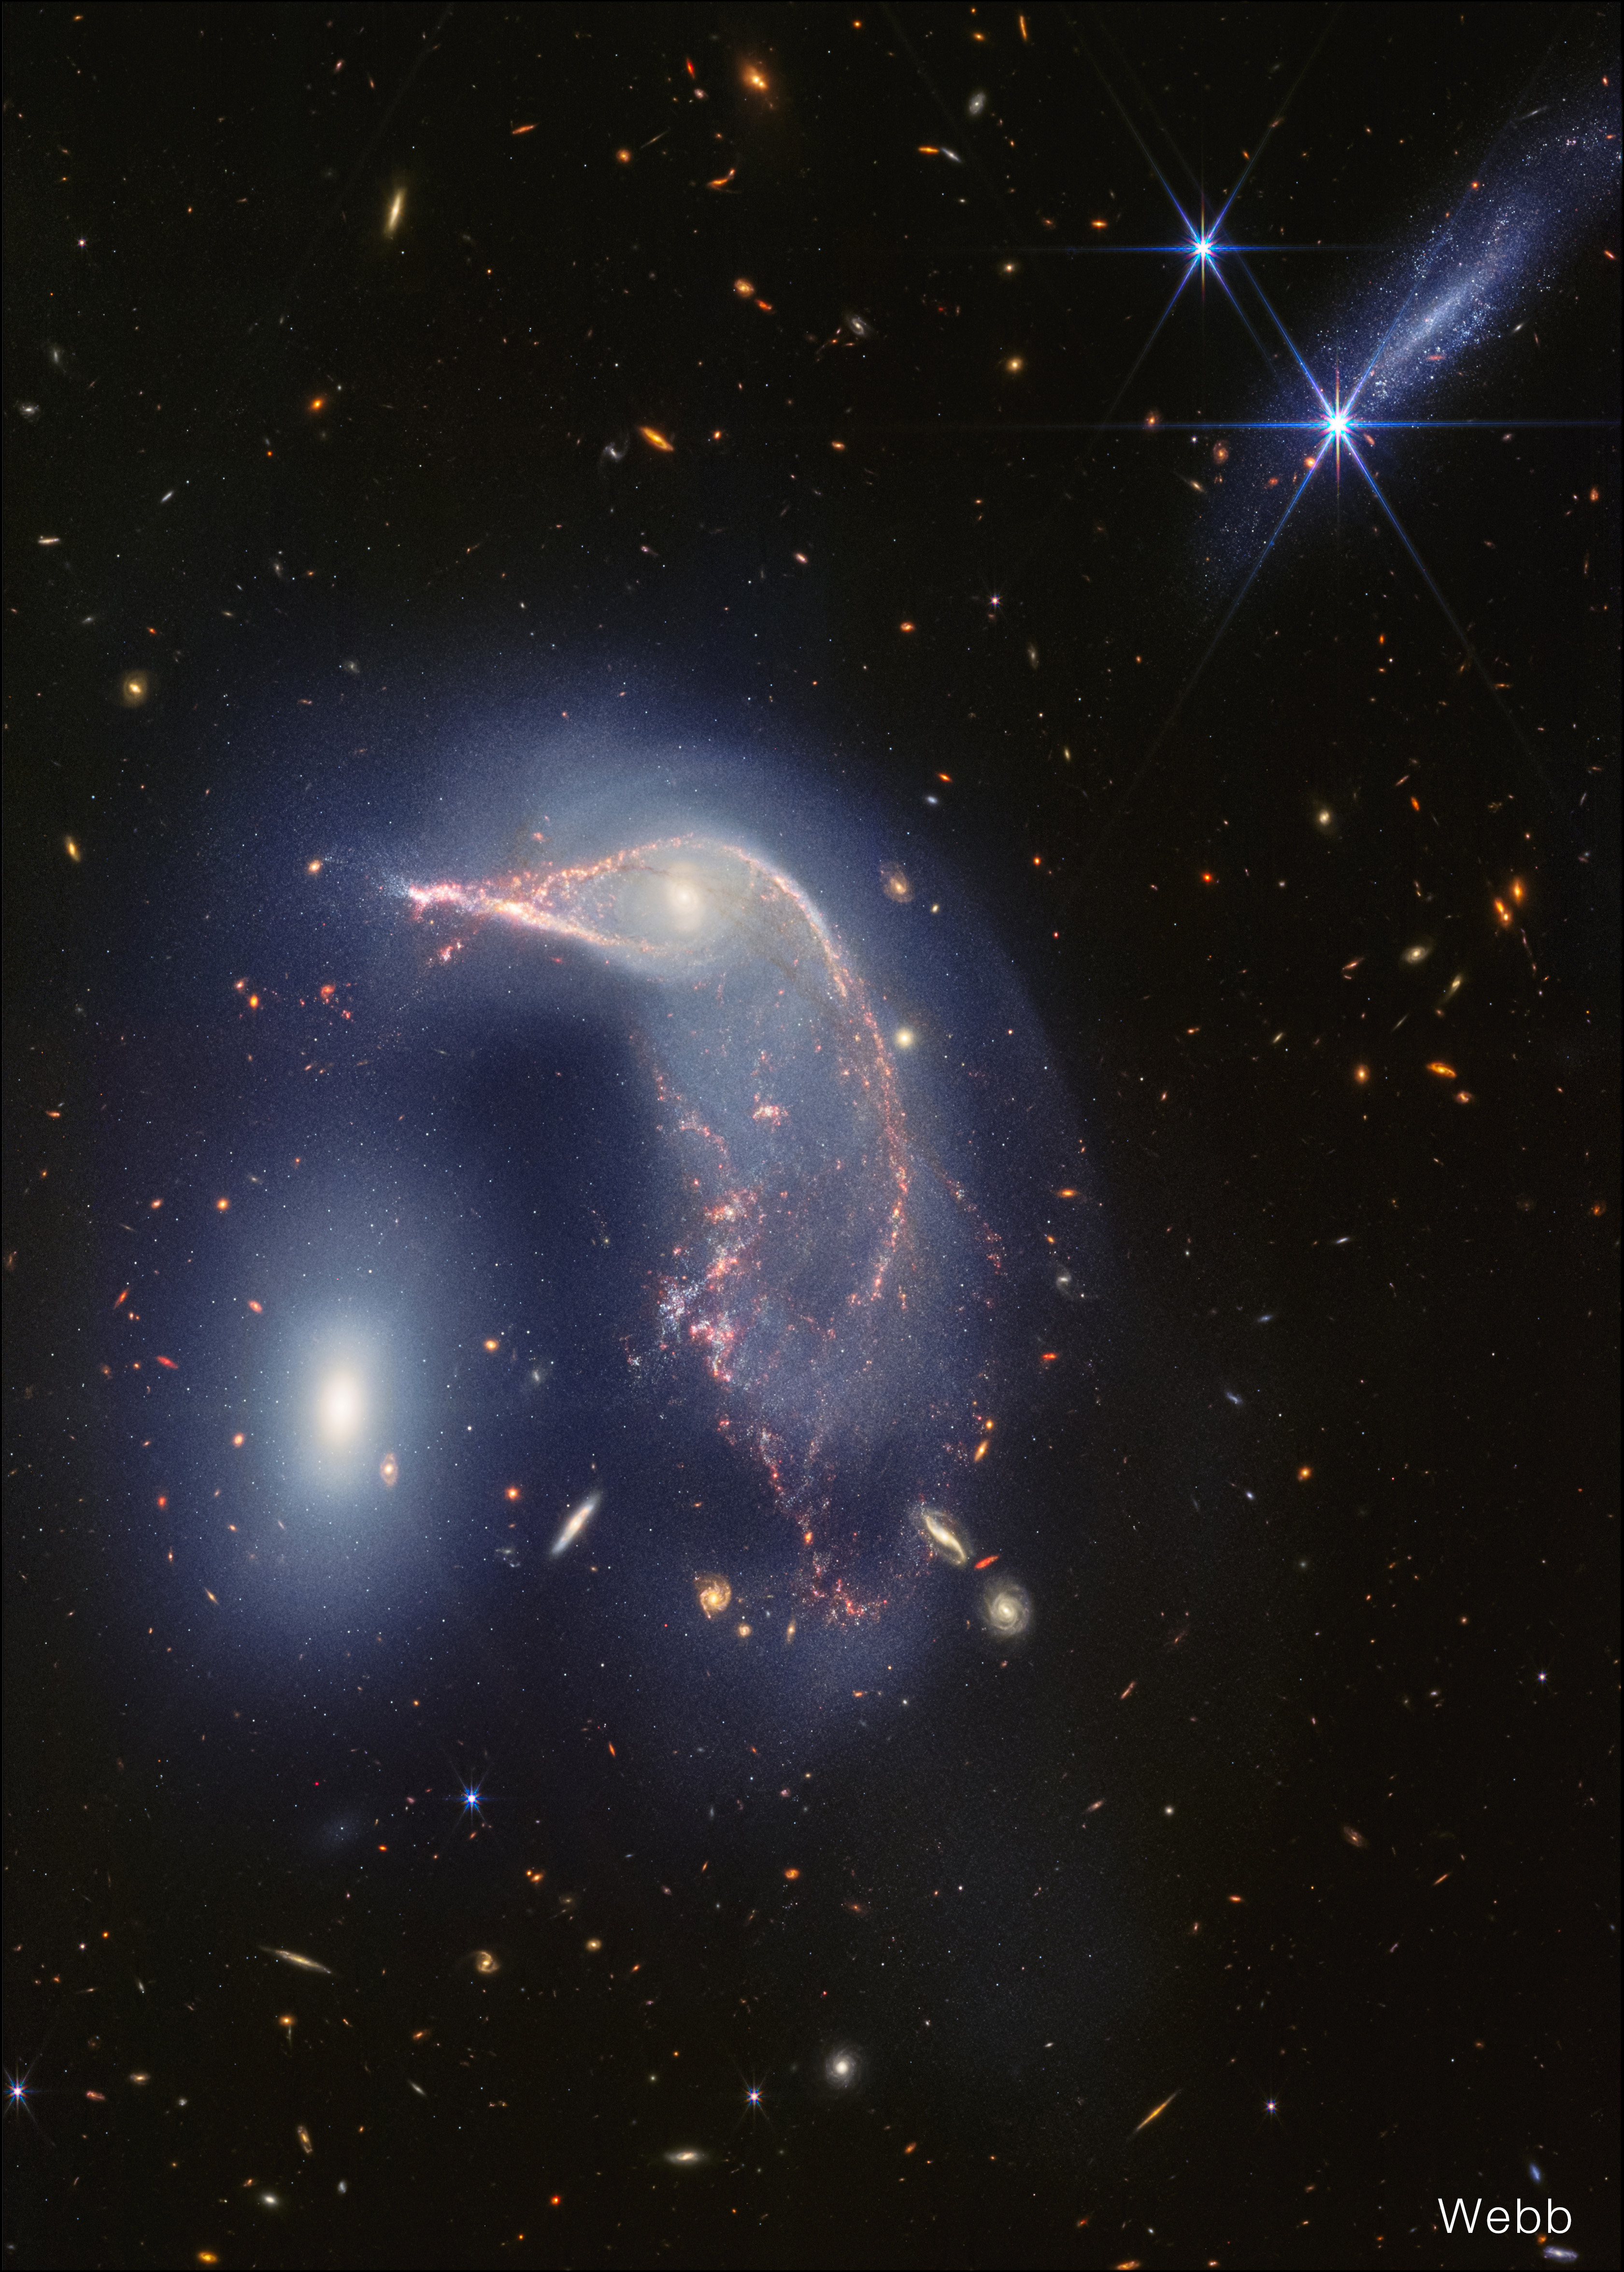 Webb's view of a Frame split down the middle: Hubble’s visible light image at left, and Webb’s near-infrared image at right. Both show the Egg at left and the Penguin at right. In Hubble’s view, the Penguin is highly detailed, with a bright blue beak, body, and tail that is covered in an arc of bright brown dust. The Egg, to its left, appears bright, gleaming yellowish white. At top right is another galaxy seen from the side, about as long as the Egg’s height. Dozens of galaxies and stars appear in the background. Webb’s near-infrared image shows the Penguin’s beak, head, and back in shades of pink. It’s tail-like region is more diffuse, and a mix of lighter pinks and blues. The Egg appears slightly larger in blue layers. A semi-transparent blue forms an upside down U overtop both galaxies. At top right, an edge-on galaxy has many more pinpricks of light, which are stars. Thousands of galaxies and stars appear in the background. Some galaxies are shades of orange, while others are white. Click View Description for additional details.